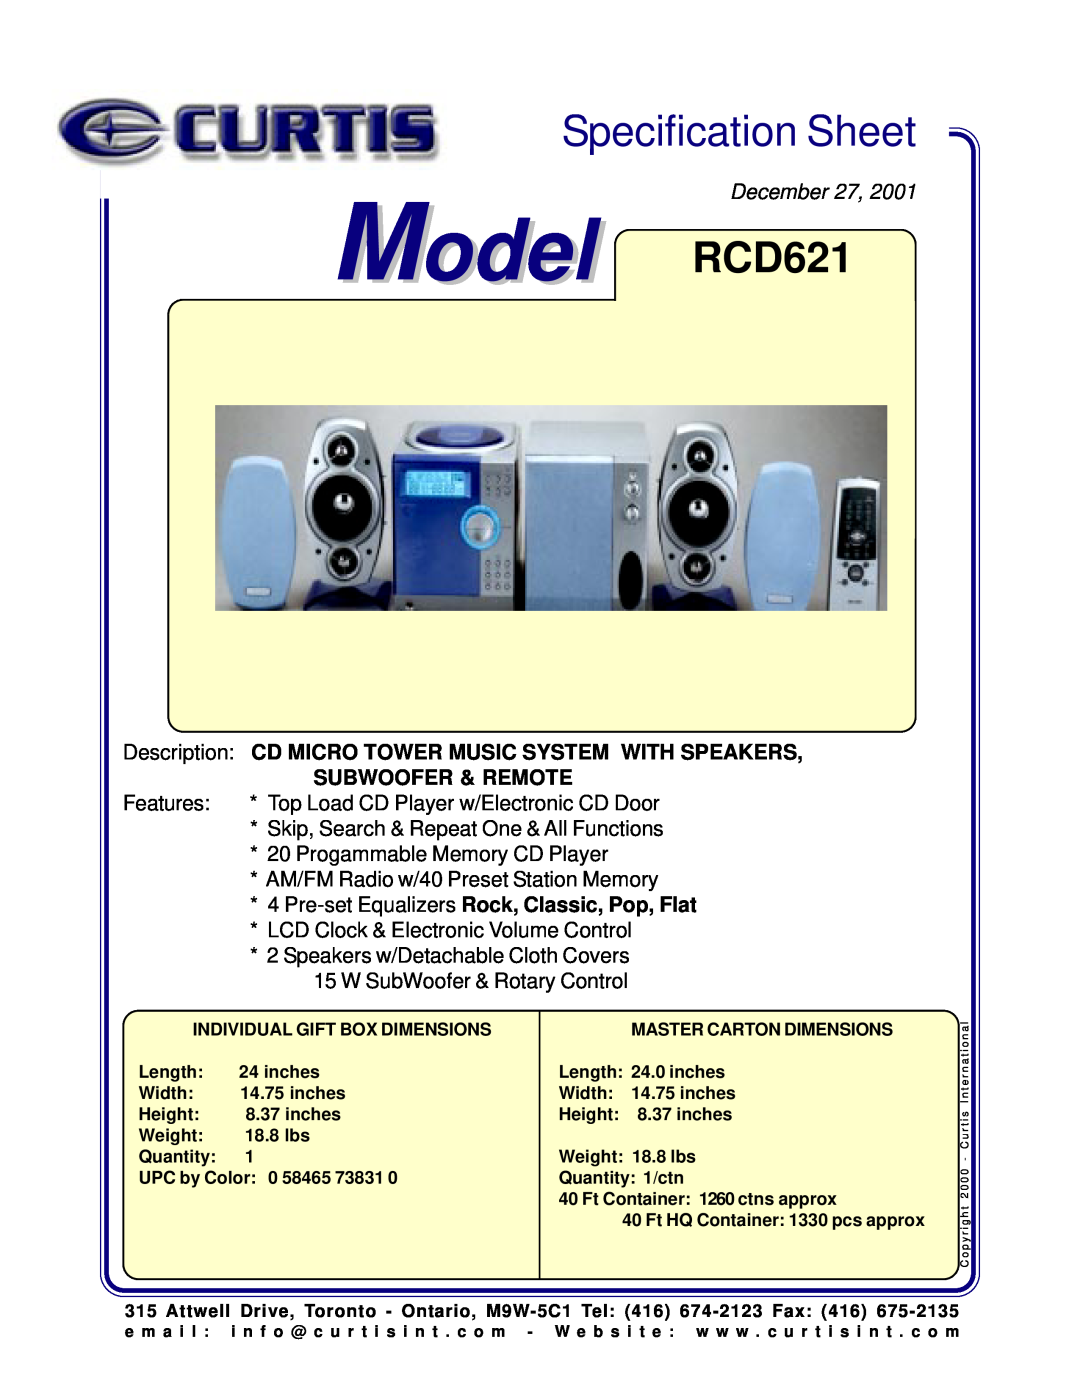 Curtis specifications Specification Sheet, Model RCD621, December, Place Image Here, Subwoofer & Remote 